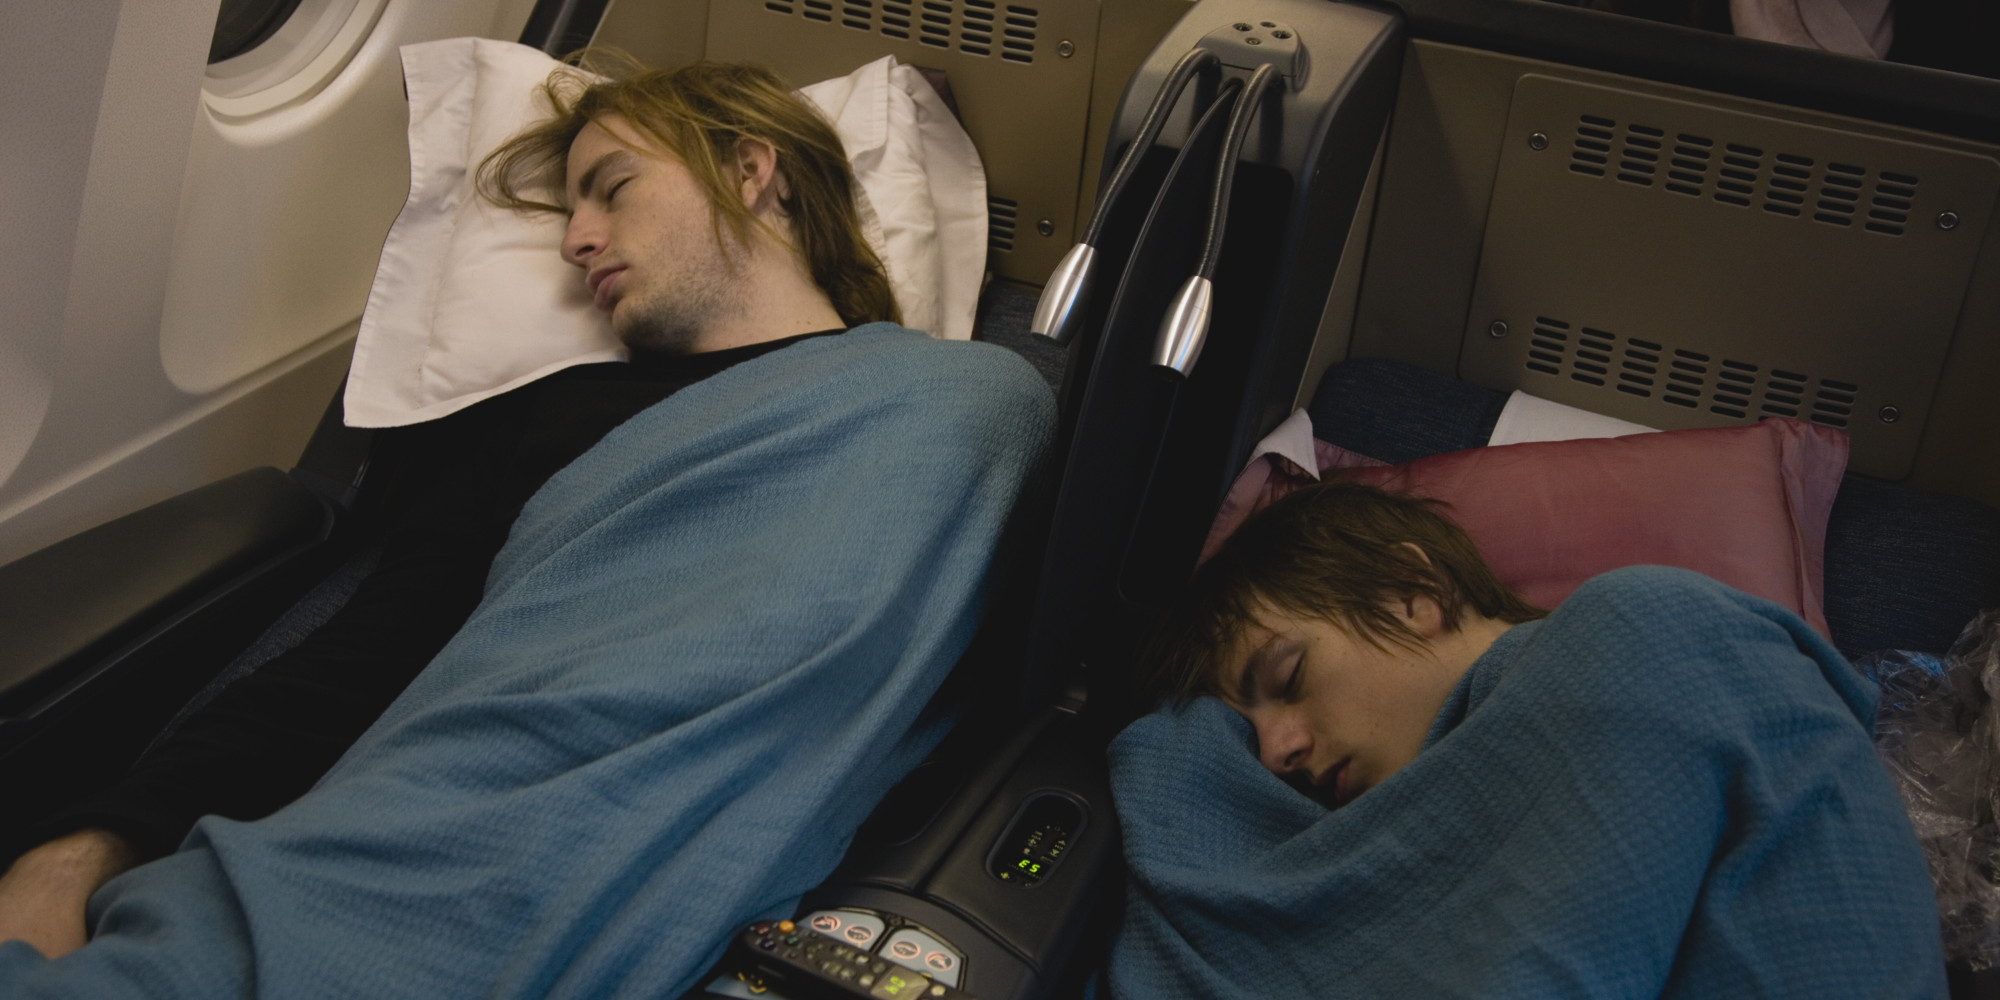 Two young men sleeping in airplane